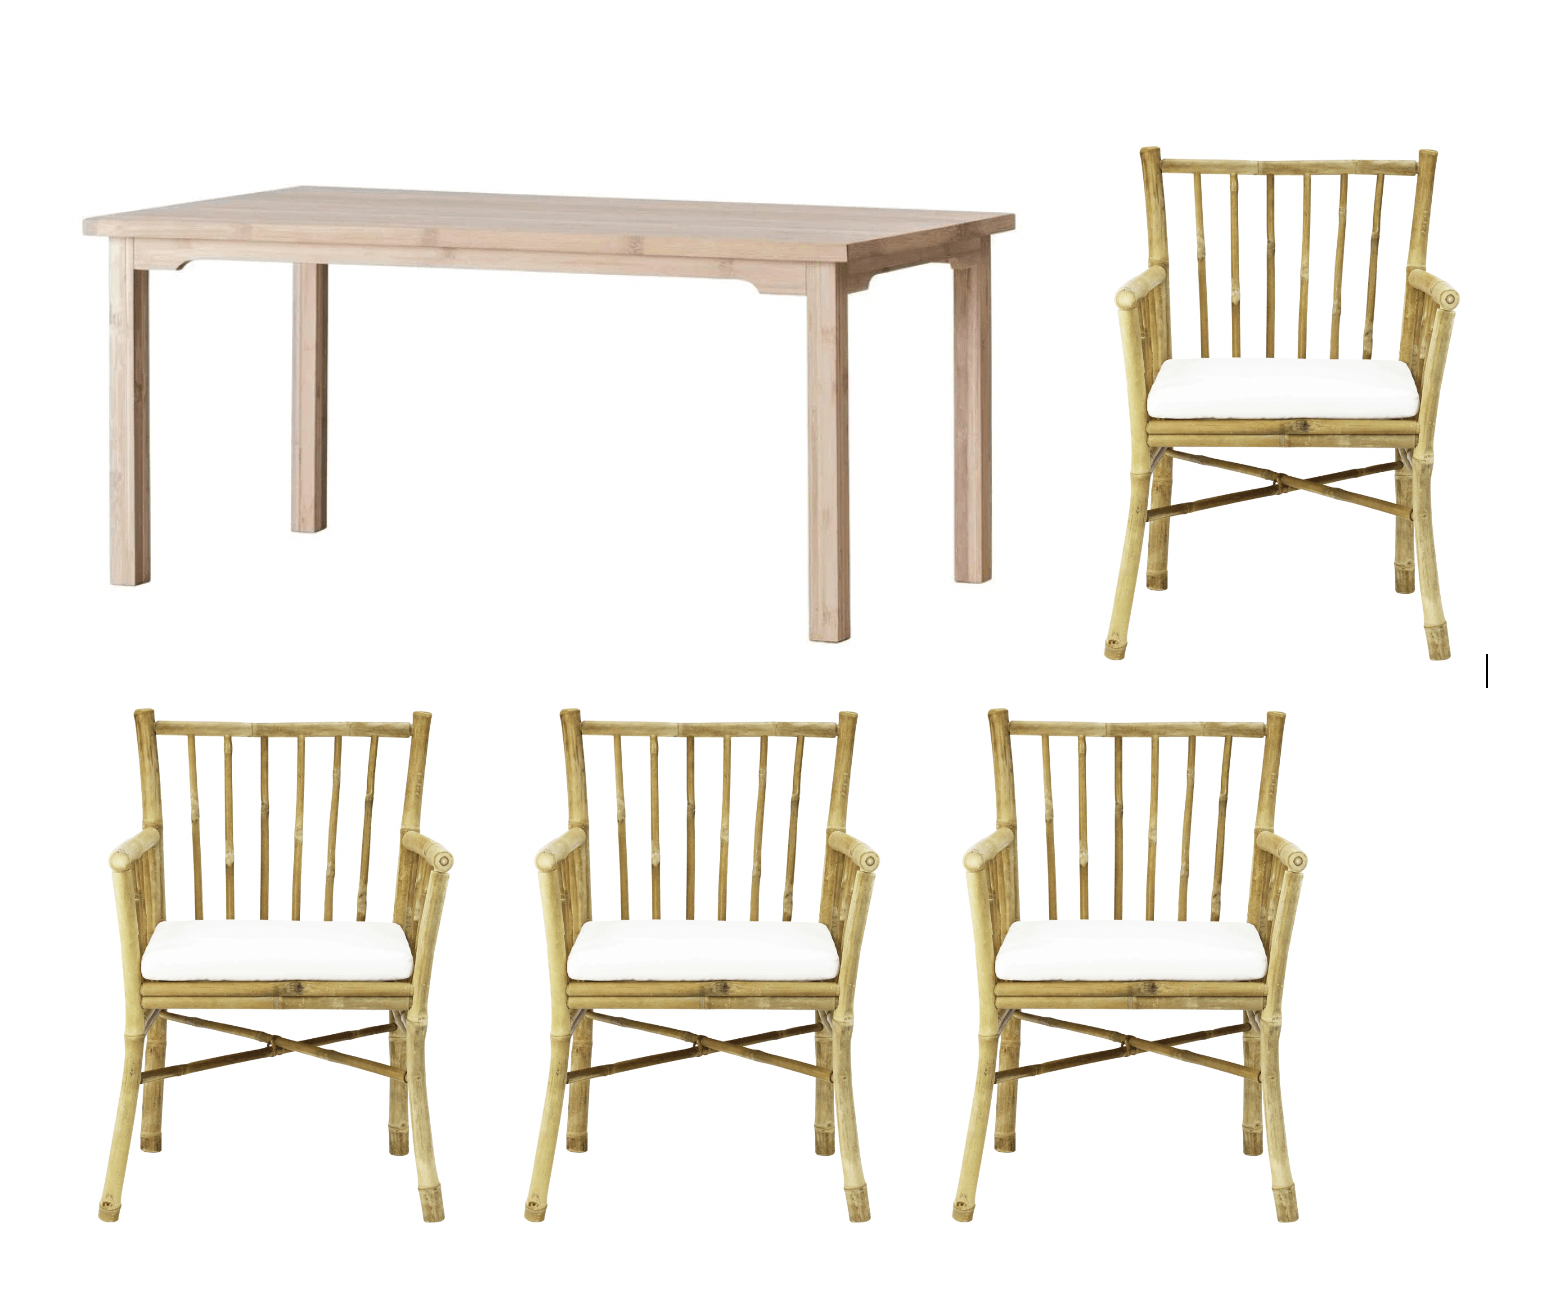 Bamboo package, dining table 170x90 and 4 Luna dining table chairs SOLD OUT DK